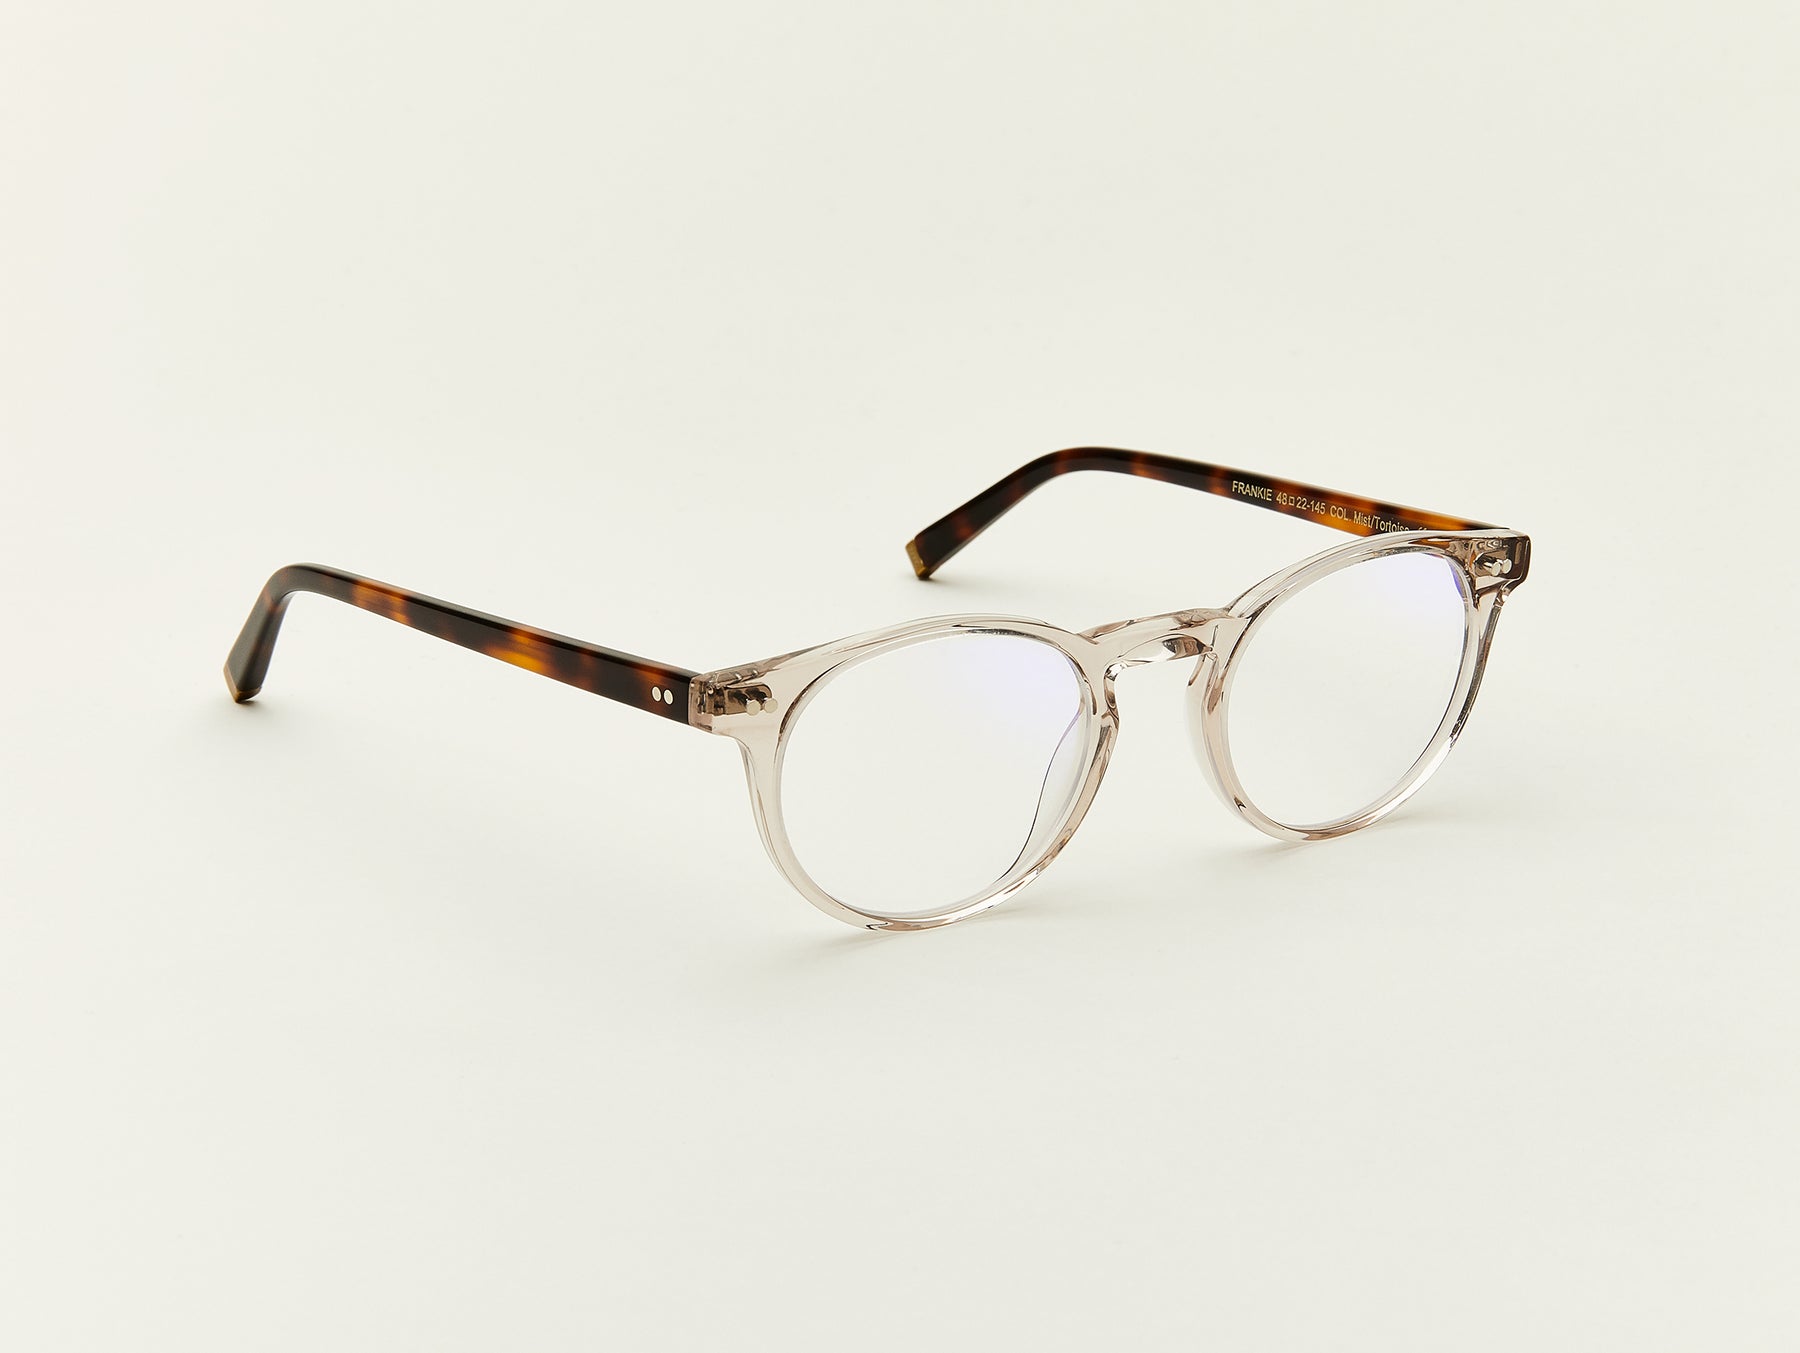 The FRANKIE in Mist/Tortoise with Blue Protect Lenses